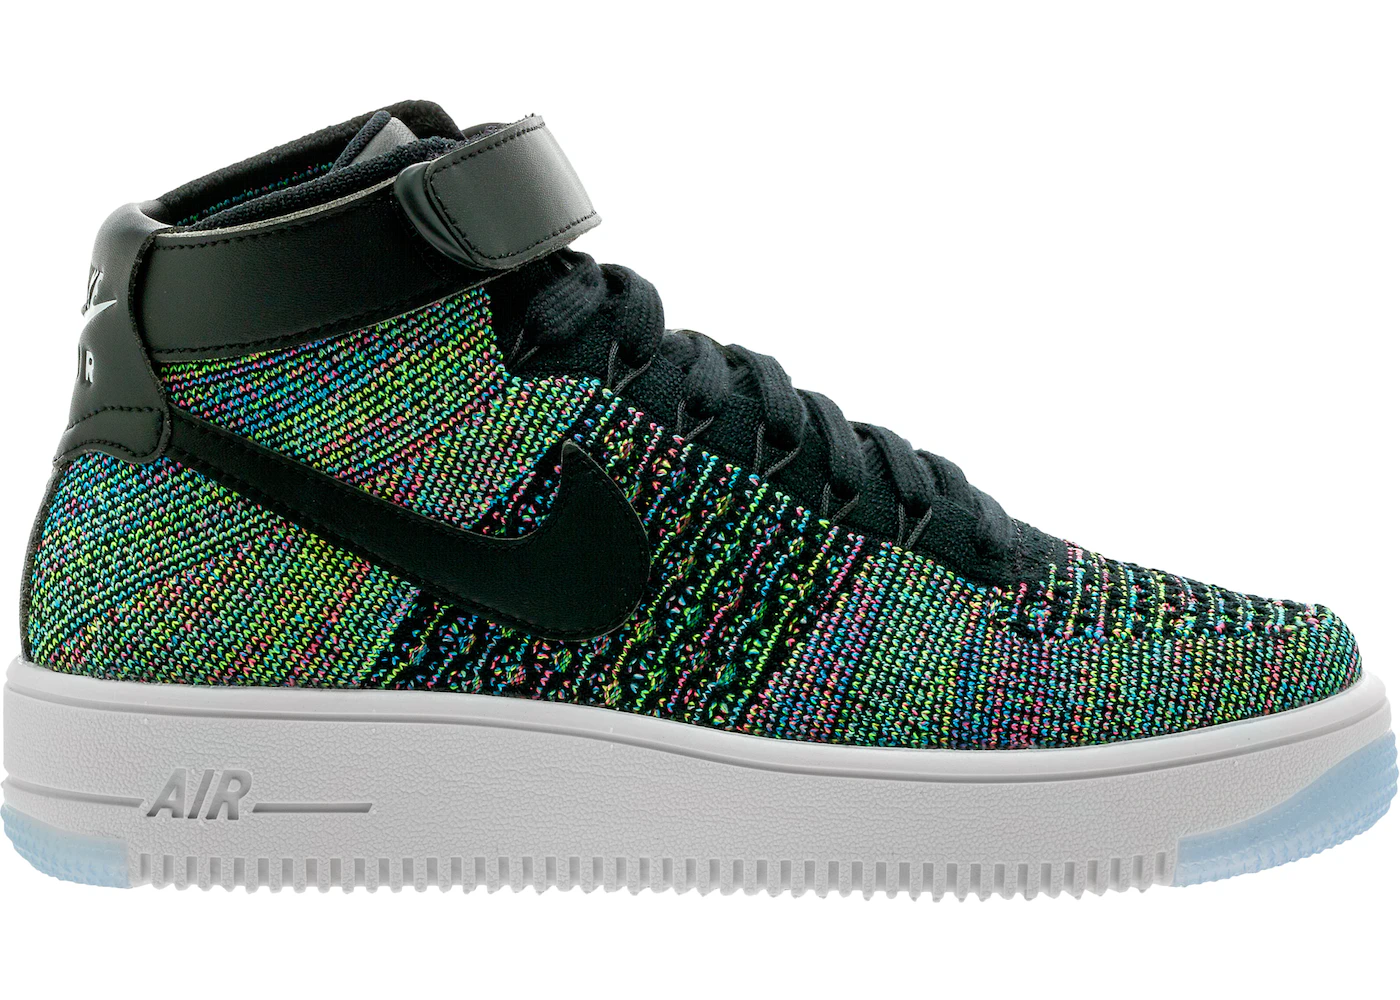 Nike Air Force 1 Ultra Flyknit Mid Multi-Color 2.0 (GS) Kids' - 862824 ...